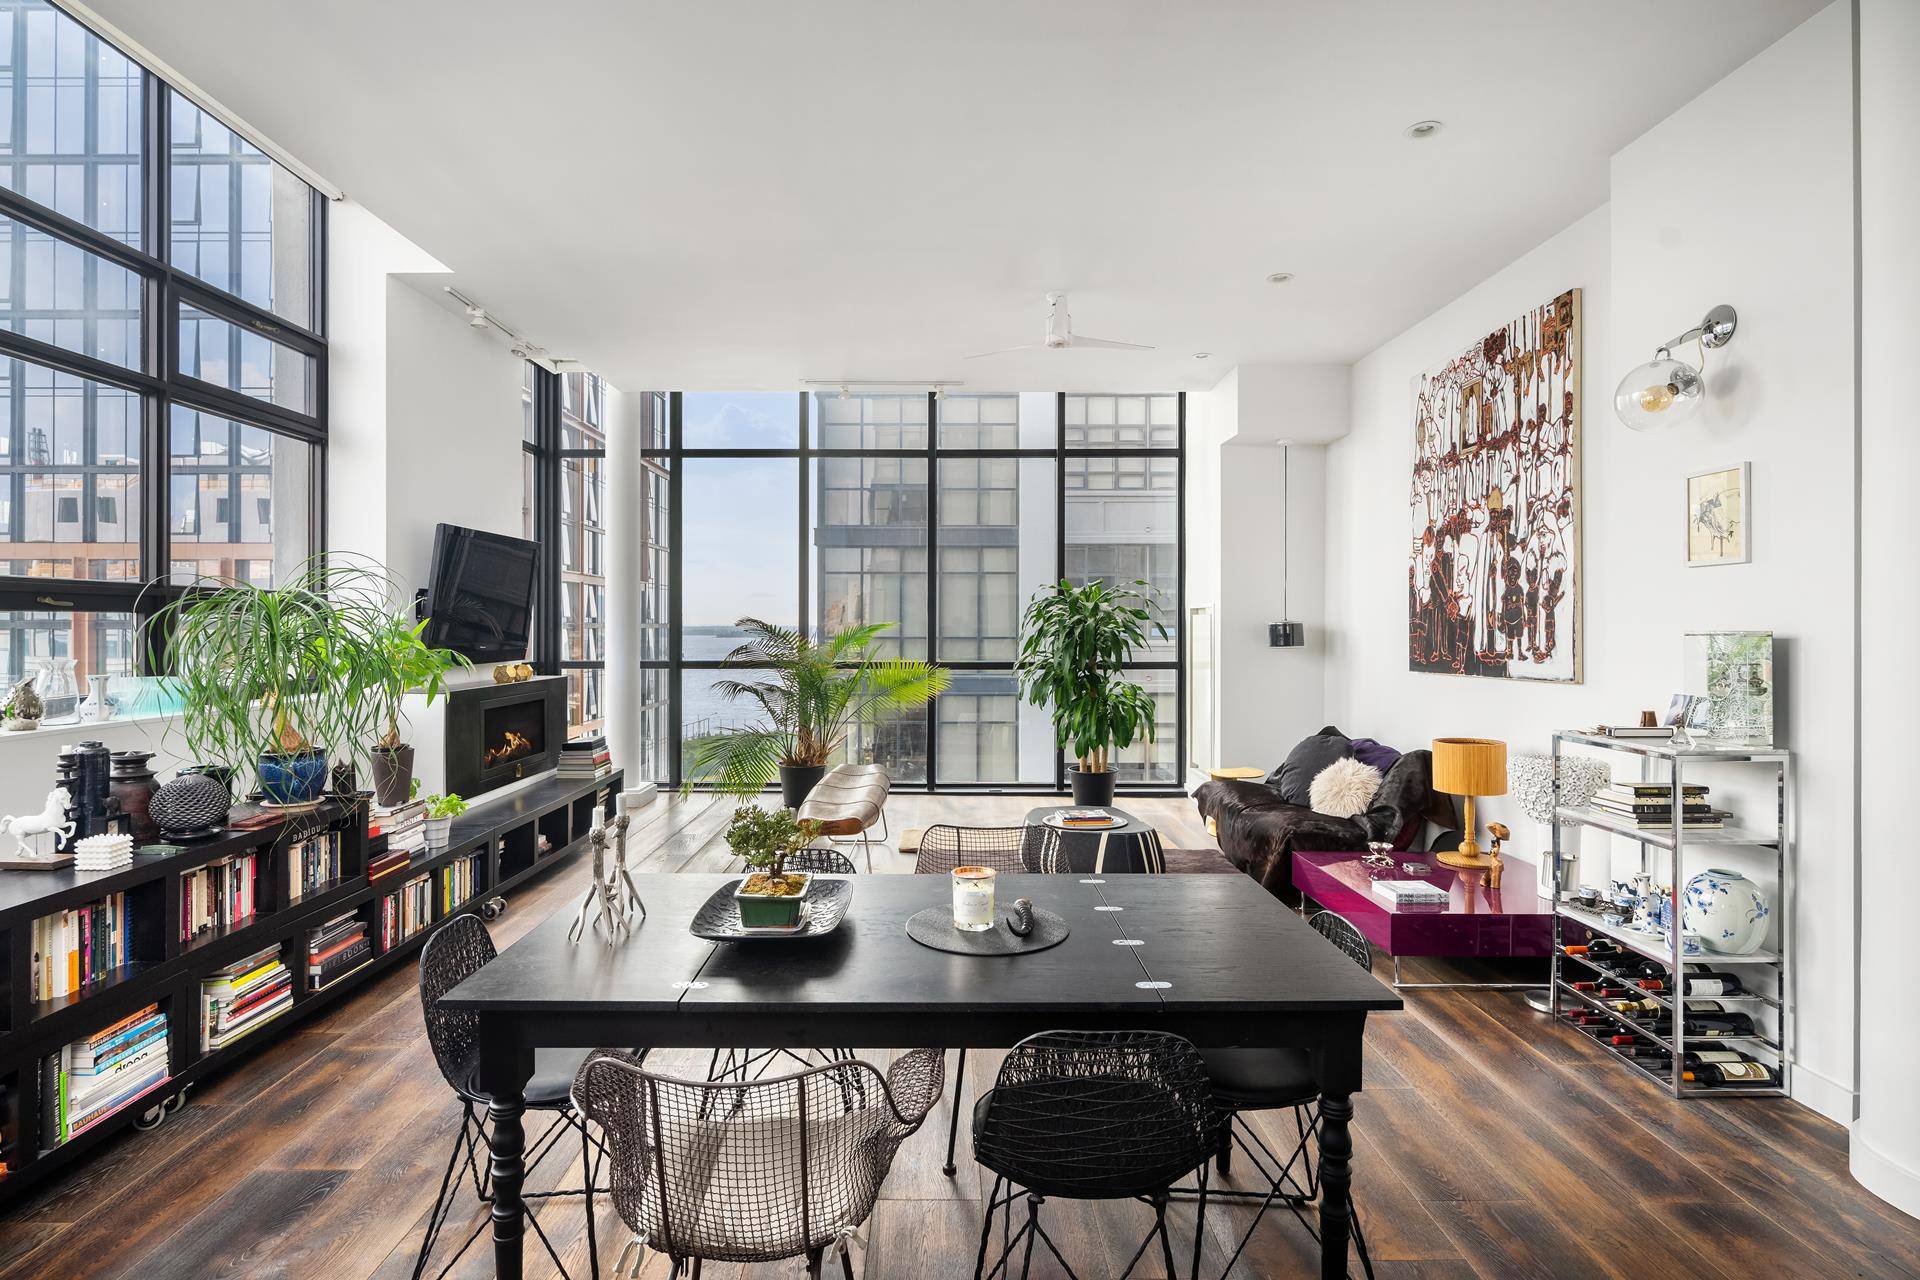 ARCHITECTURAL LUXURY IN A WATERFRONT PARK This meticulously and unconventionally designed loft with floor to ceiling glass overlooking the East River, fuses cutting edge style with sophistication and architectural detail ...